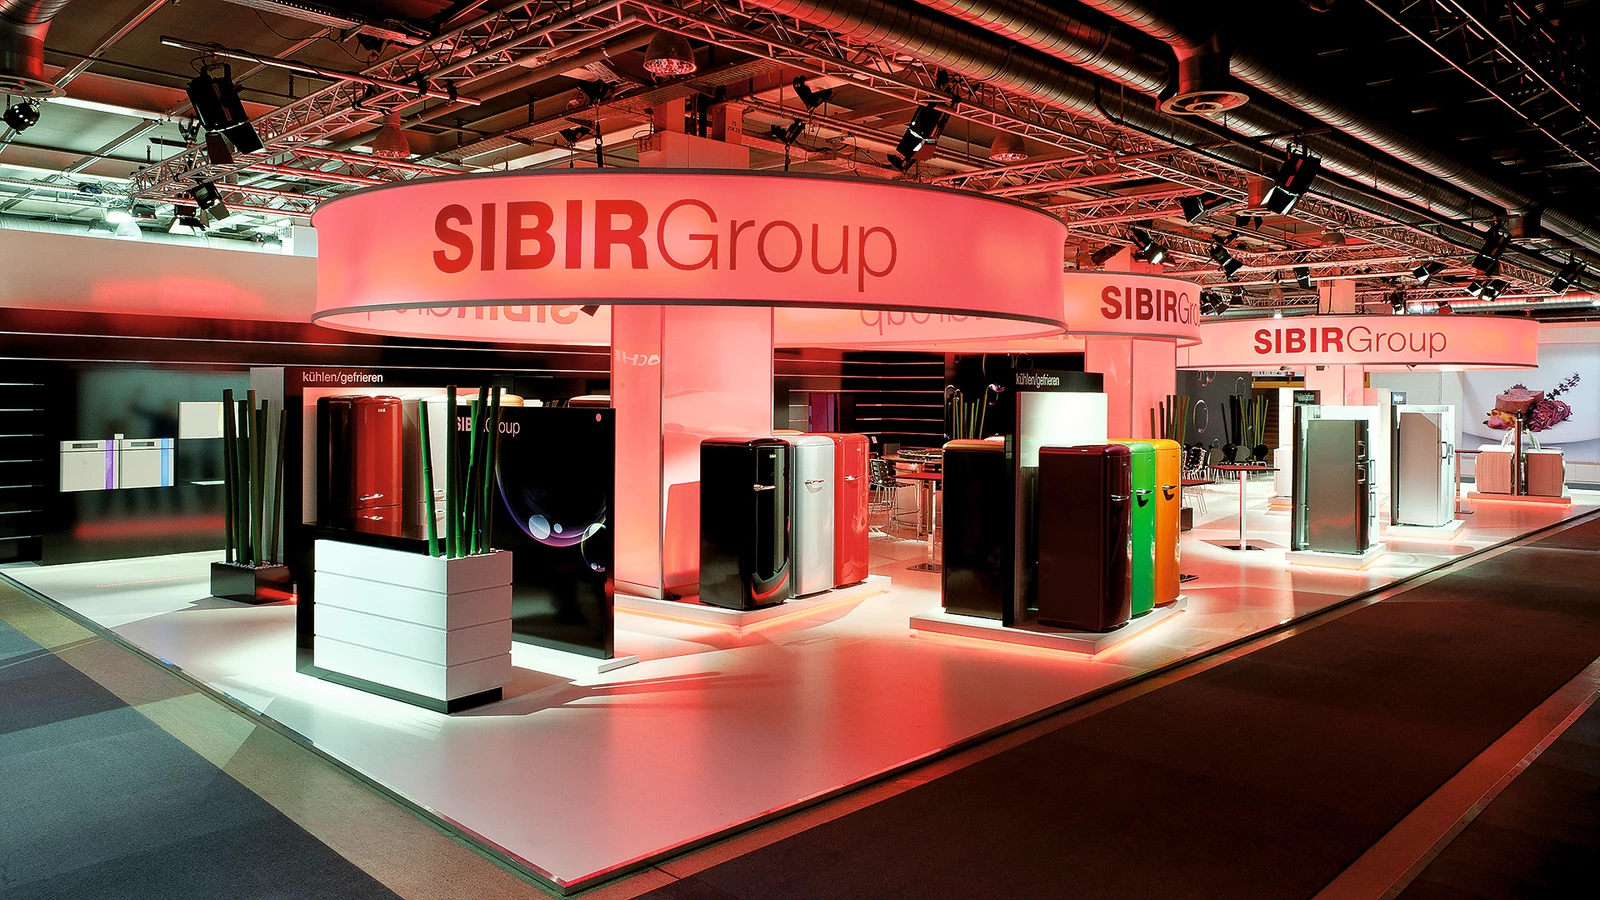 SIBIRGroup Messestand by SYMA